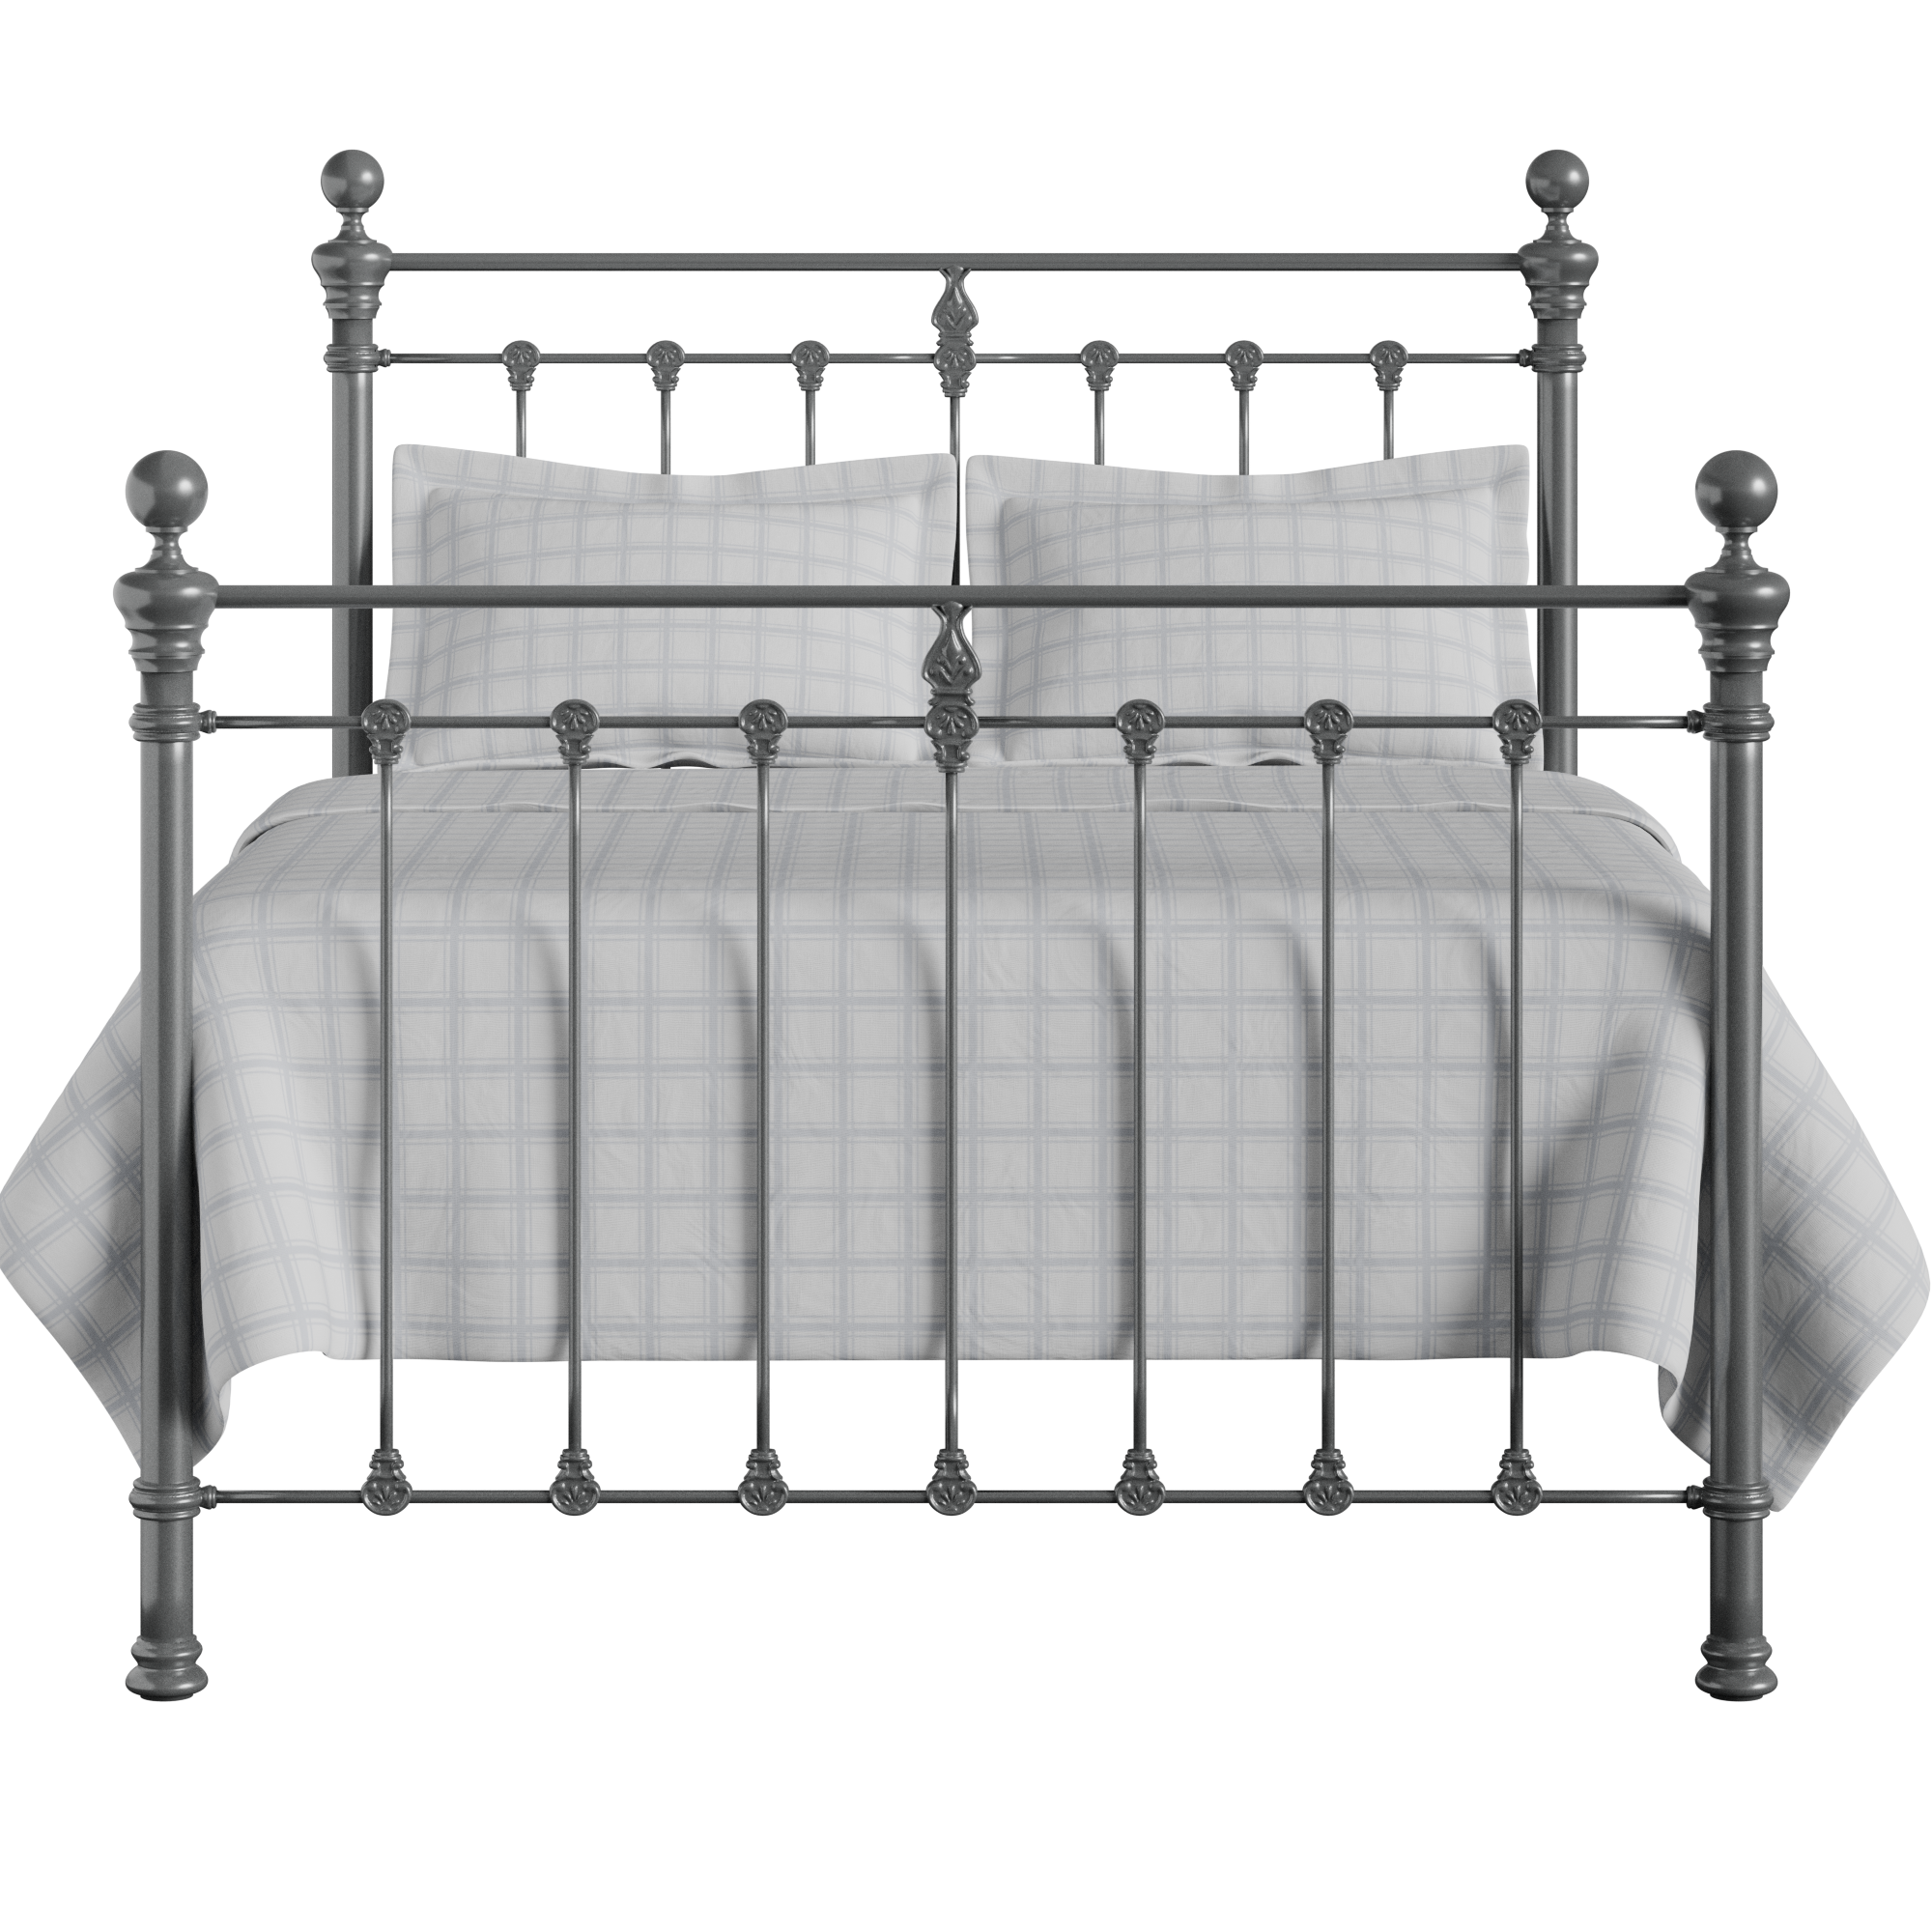 Hamilton Solo iron/metal bed in pewter